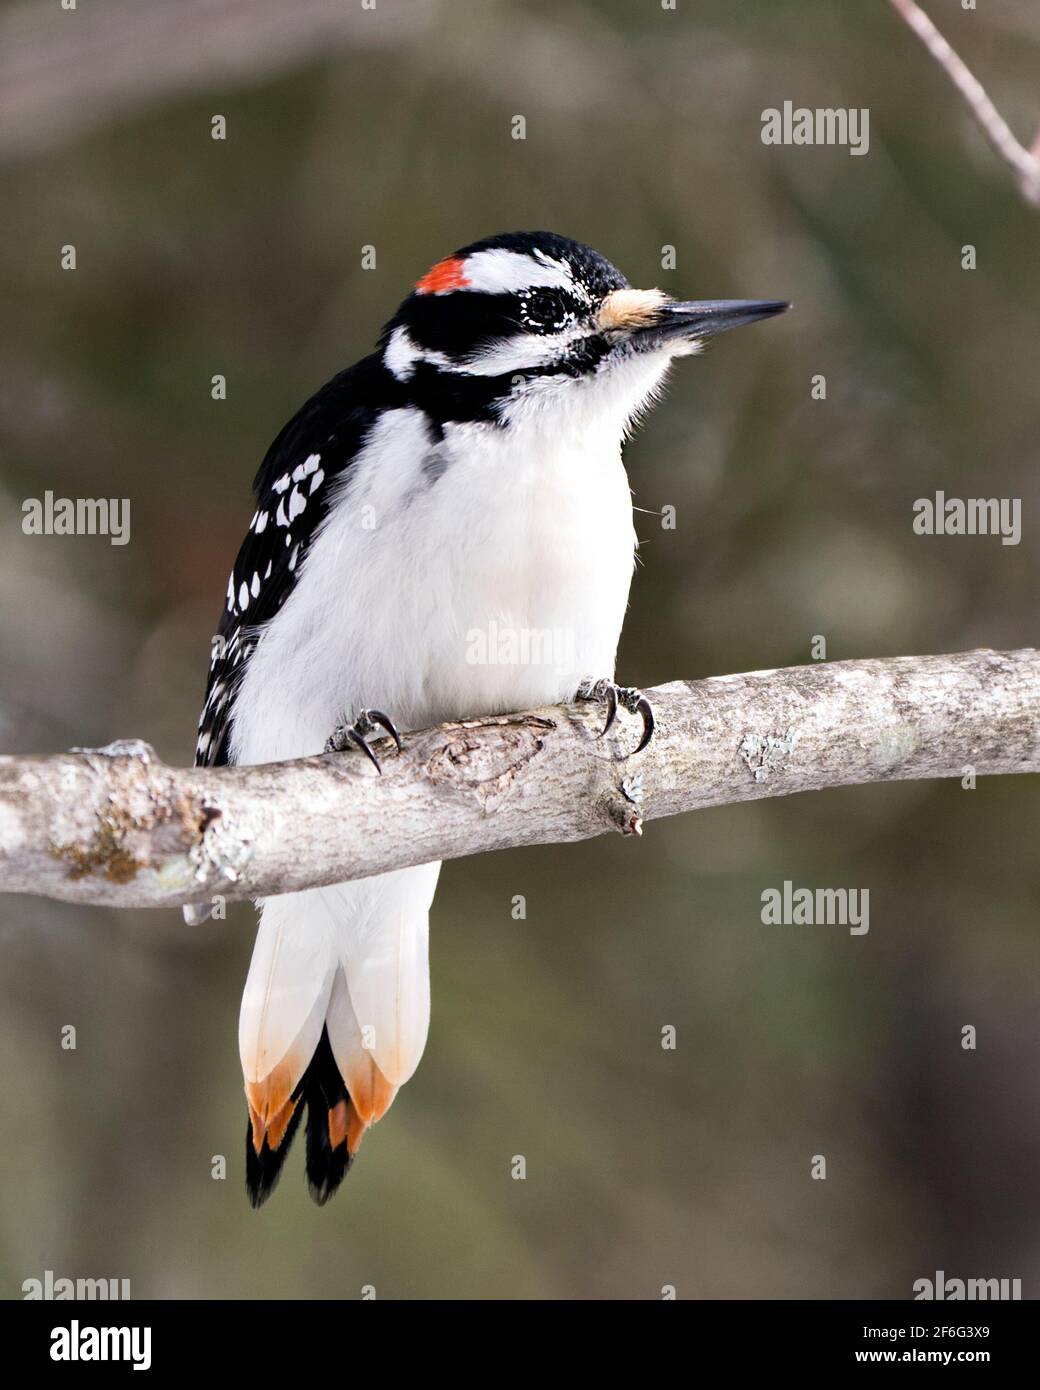 Woodpecker close-up profile view perched on tree branch and displaying feather plumage in its environment in the forest with a blur background. Image. Stock Photo